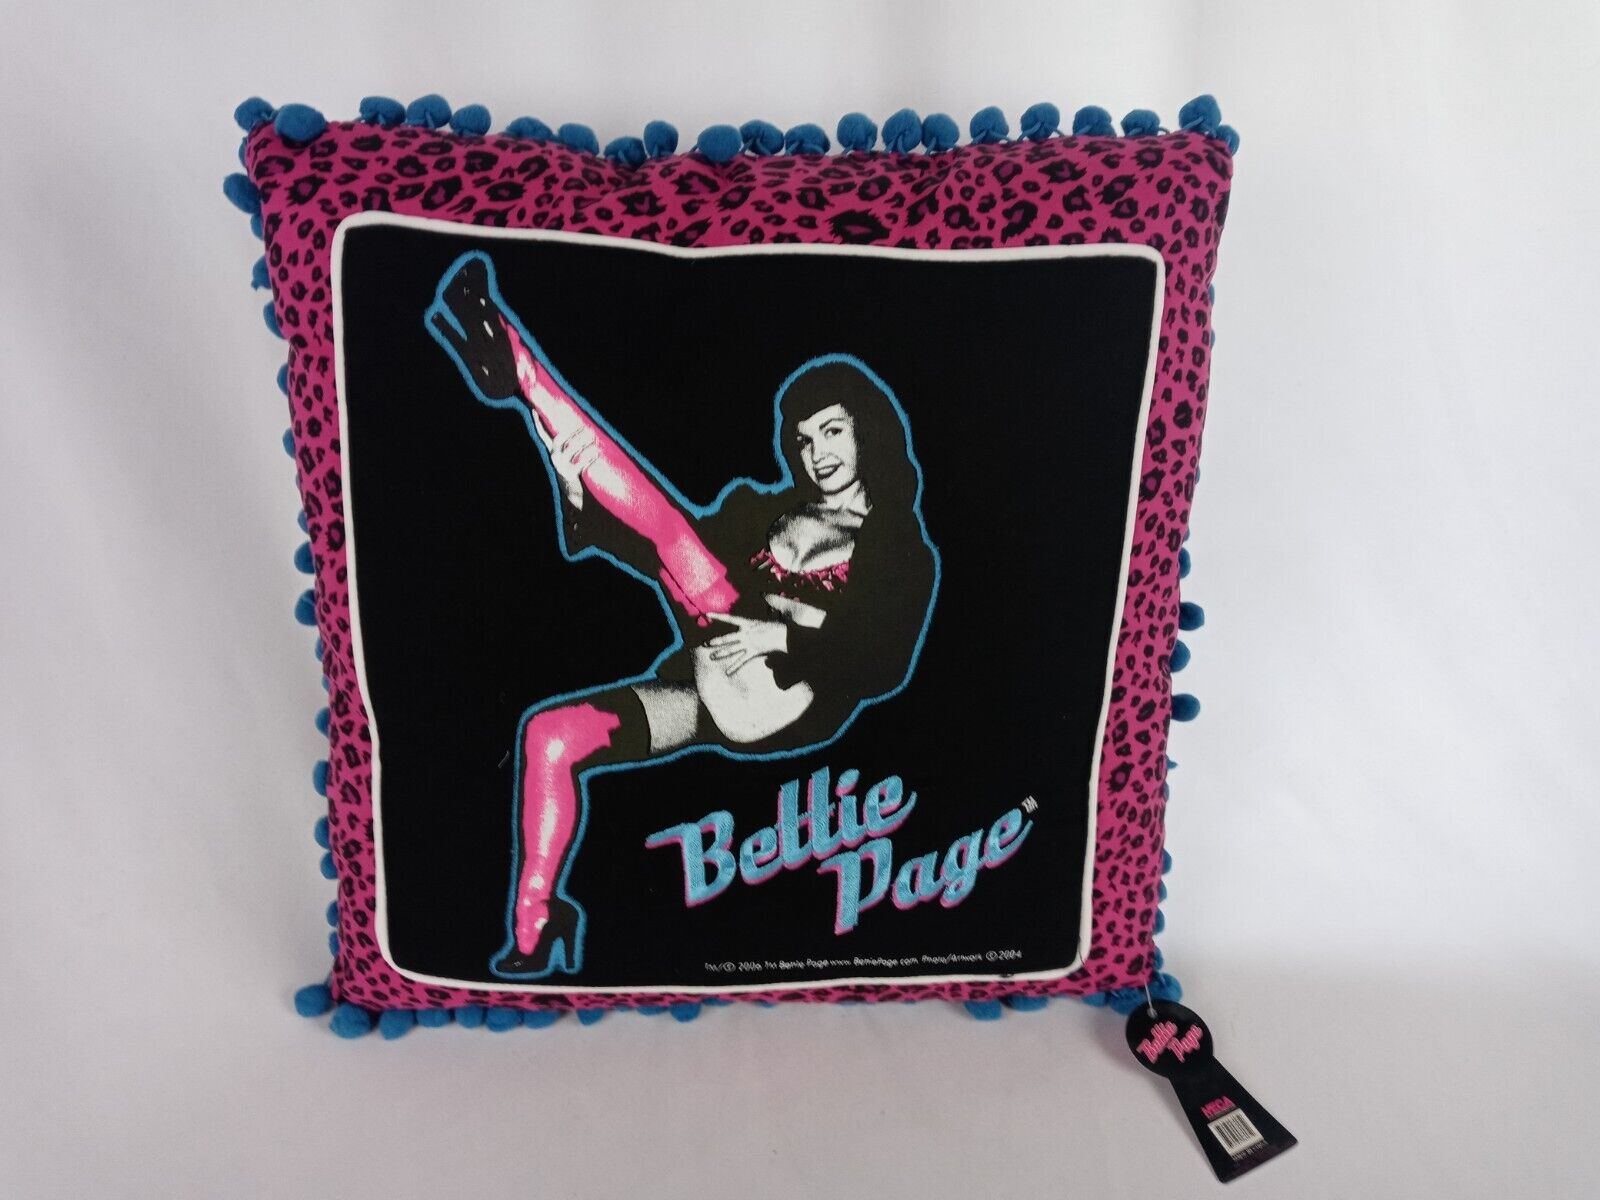 Bettie Page 14 x 14 tassels Pillow Neca brand new in bag